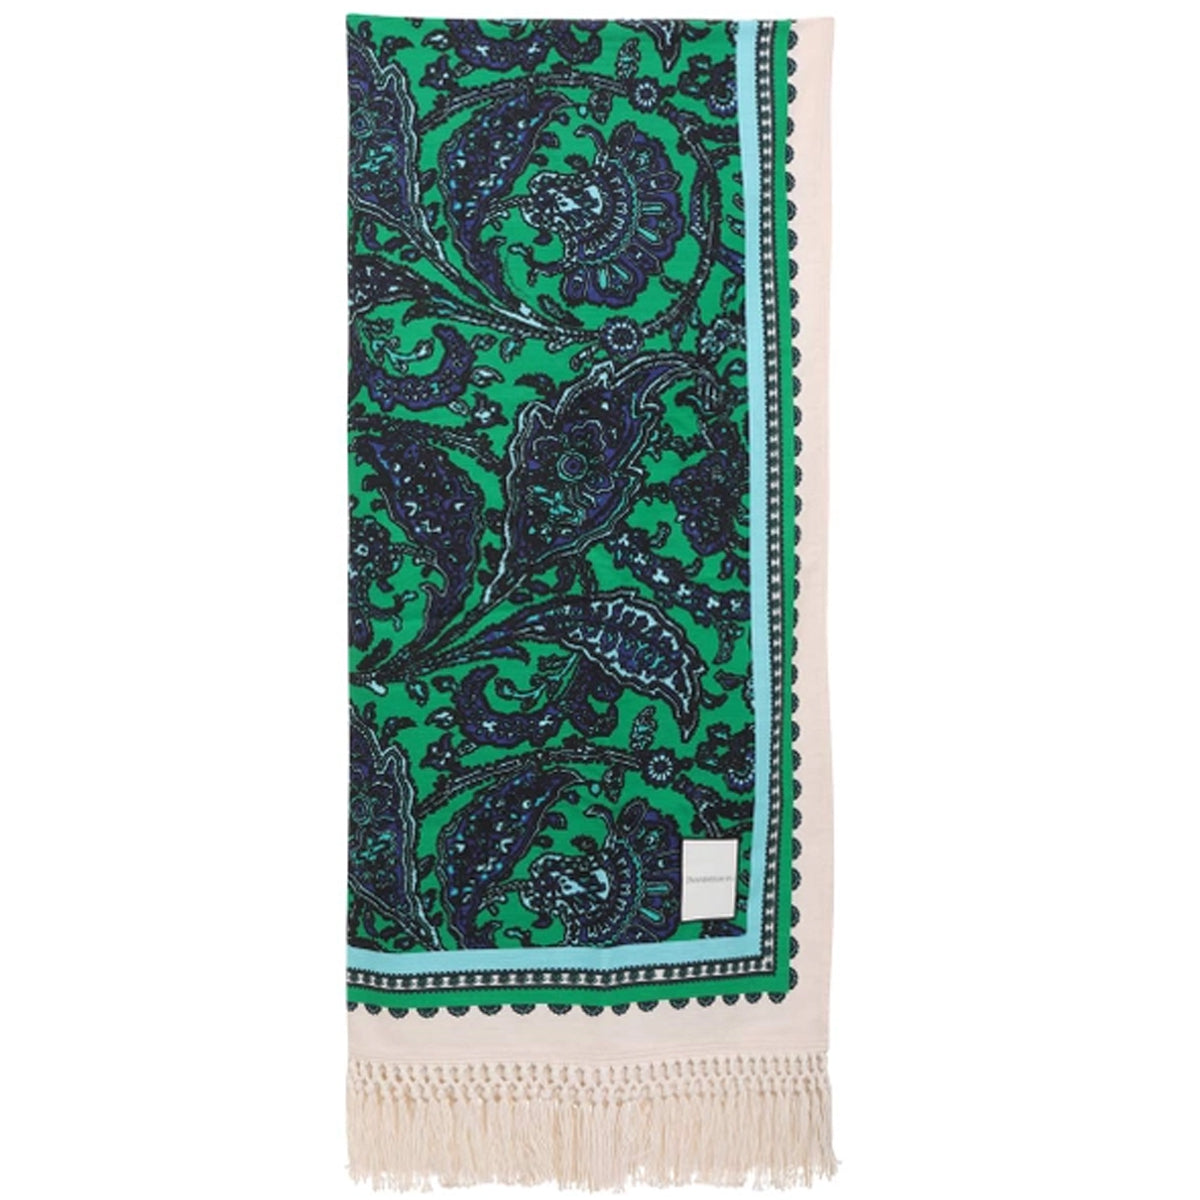 Cotton Textured Towel in Green Paisley